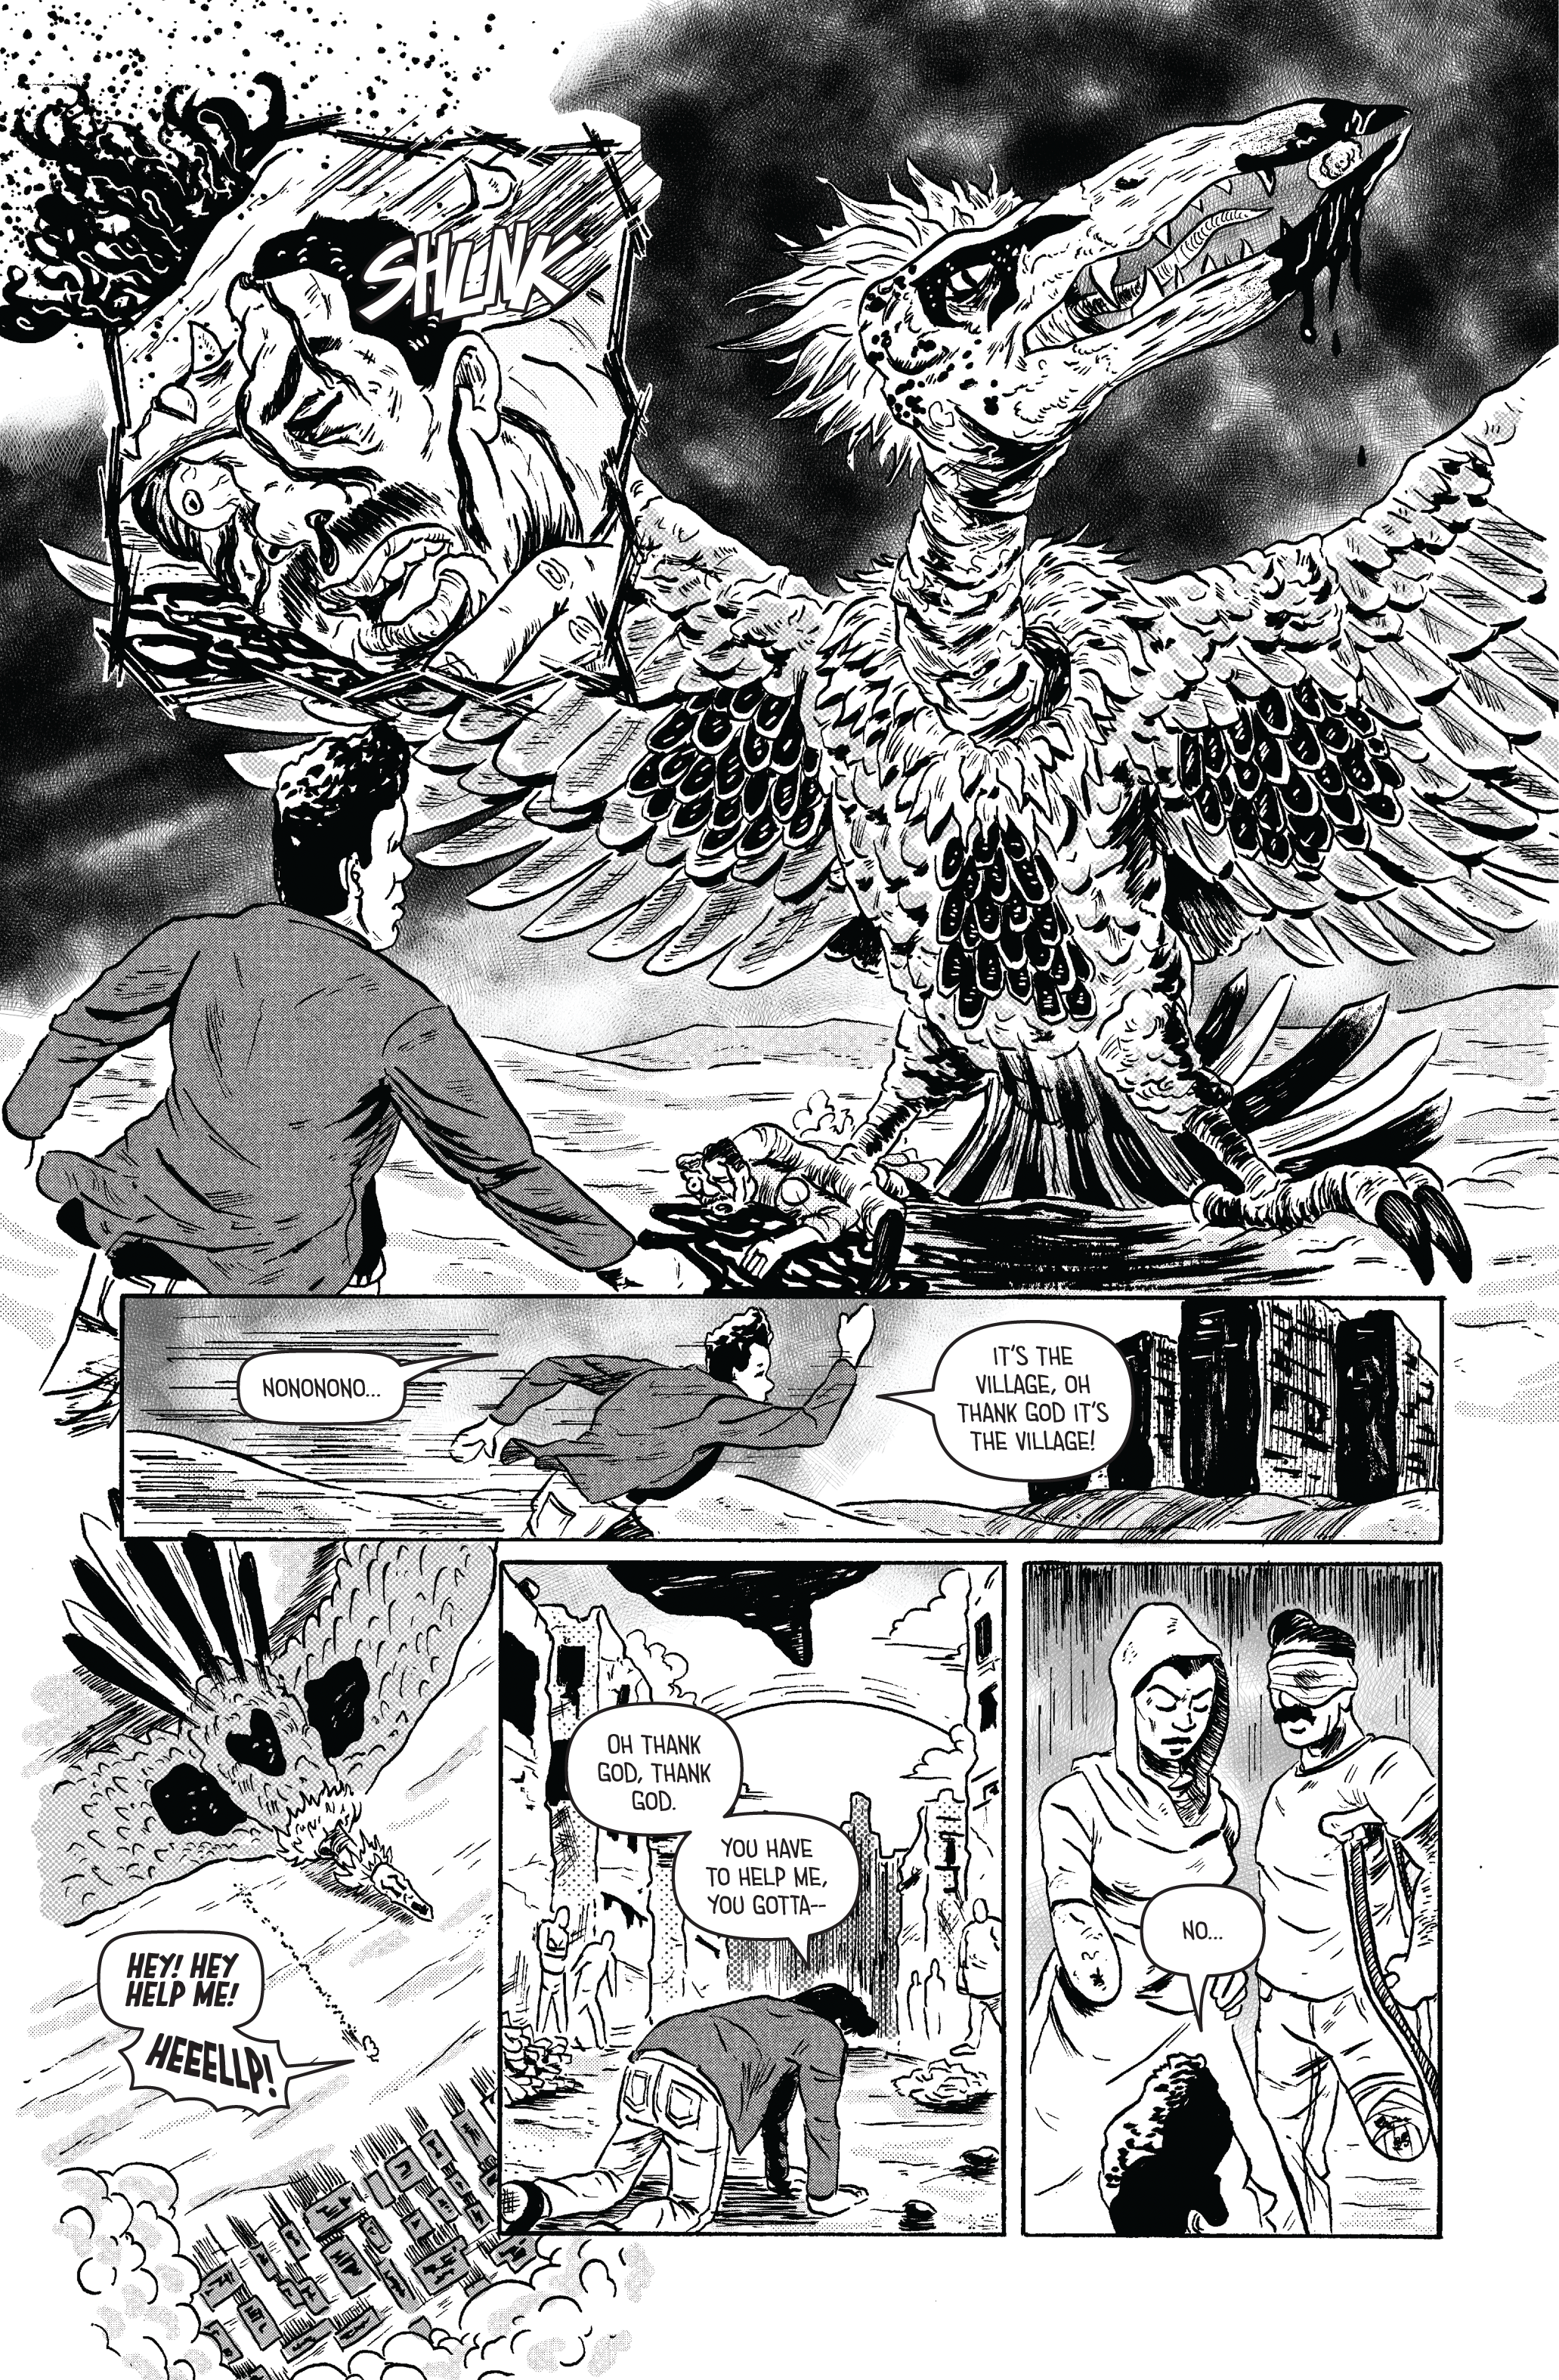 MONOCUL 02 pg 16 Death From Above pg 07-01.png